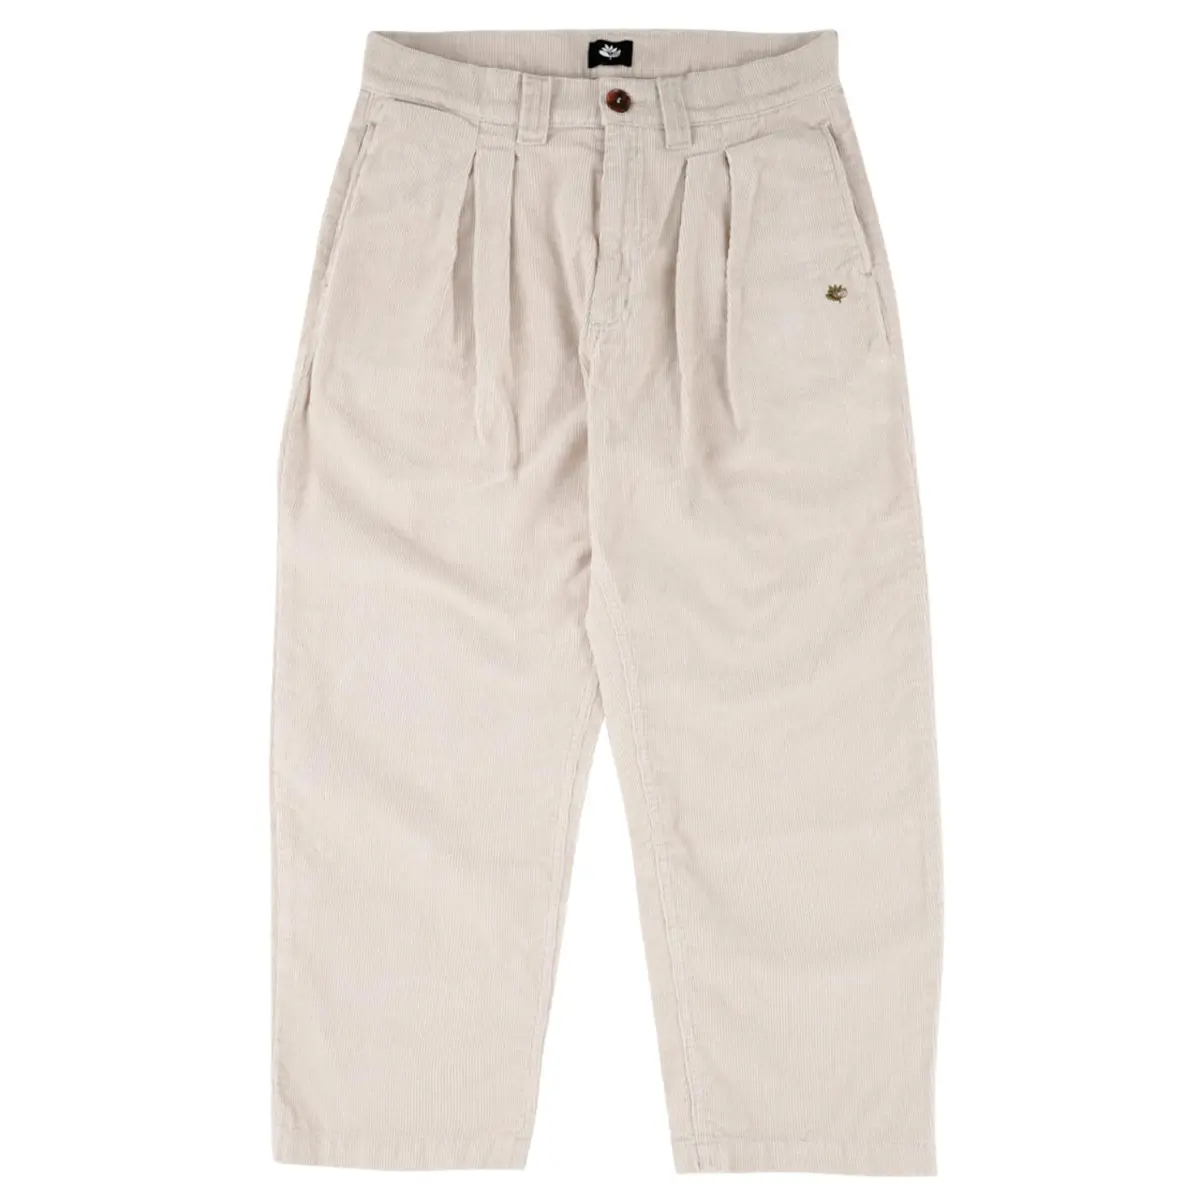 OG CHINO CORD CEMENT PANTS